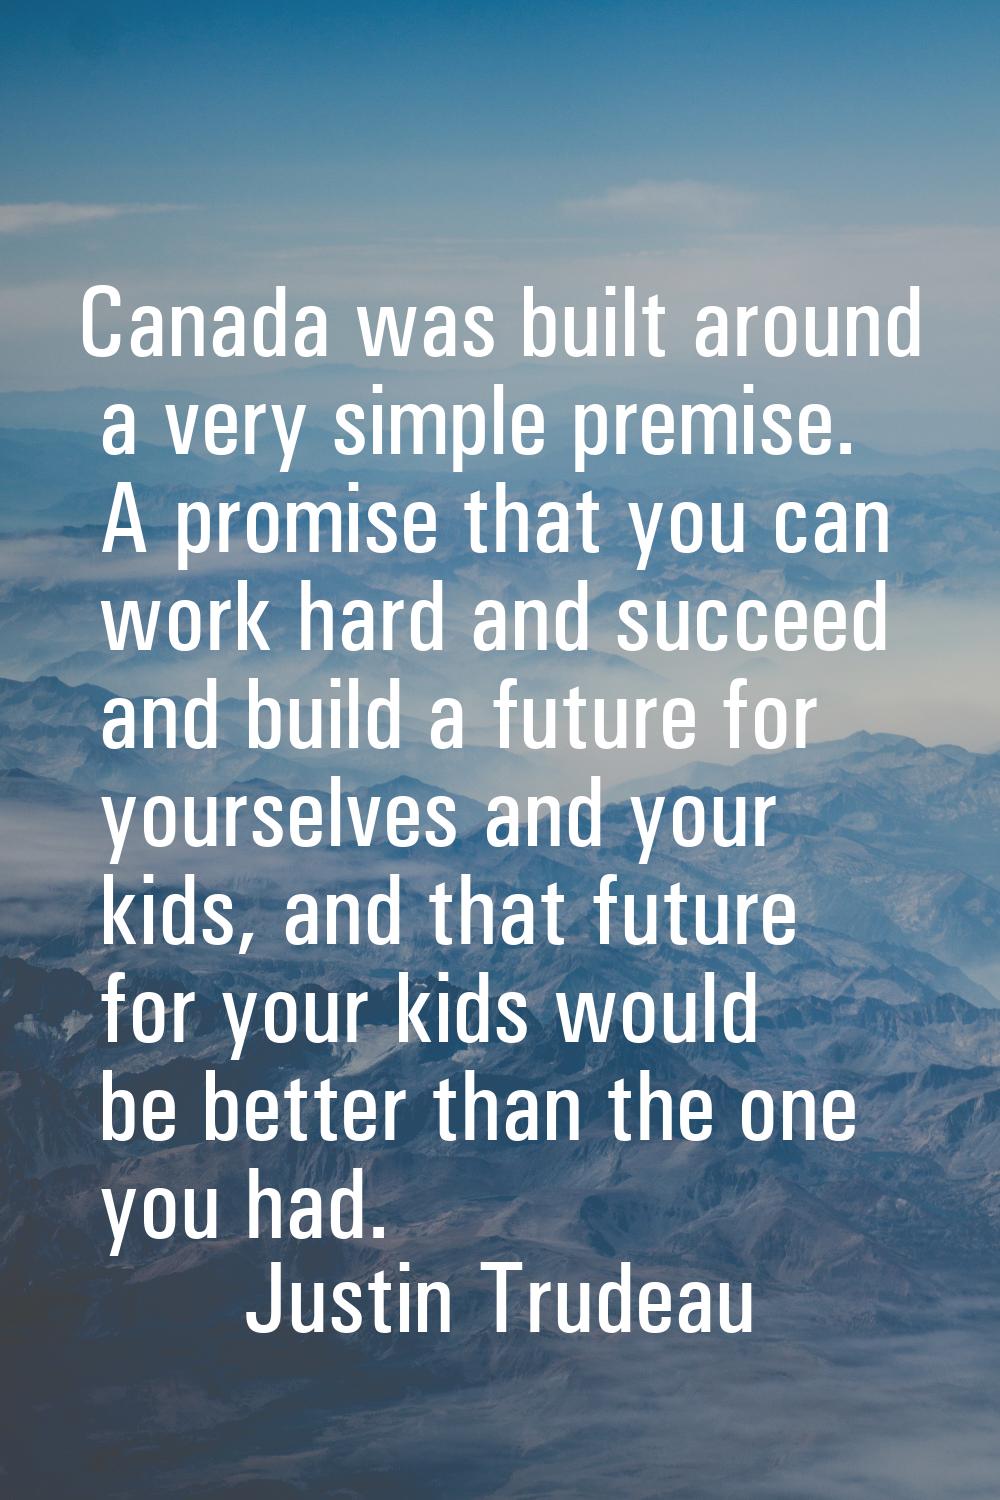 Canada was built around a very simple premise. A promise that you can work hard and succeed and bui